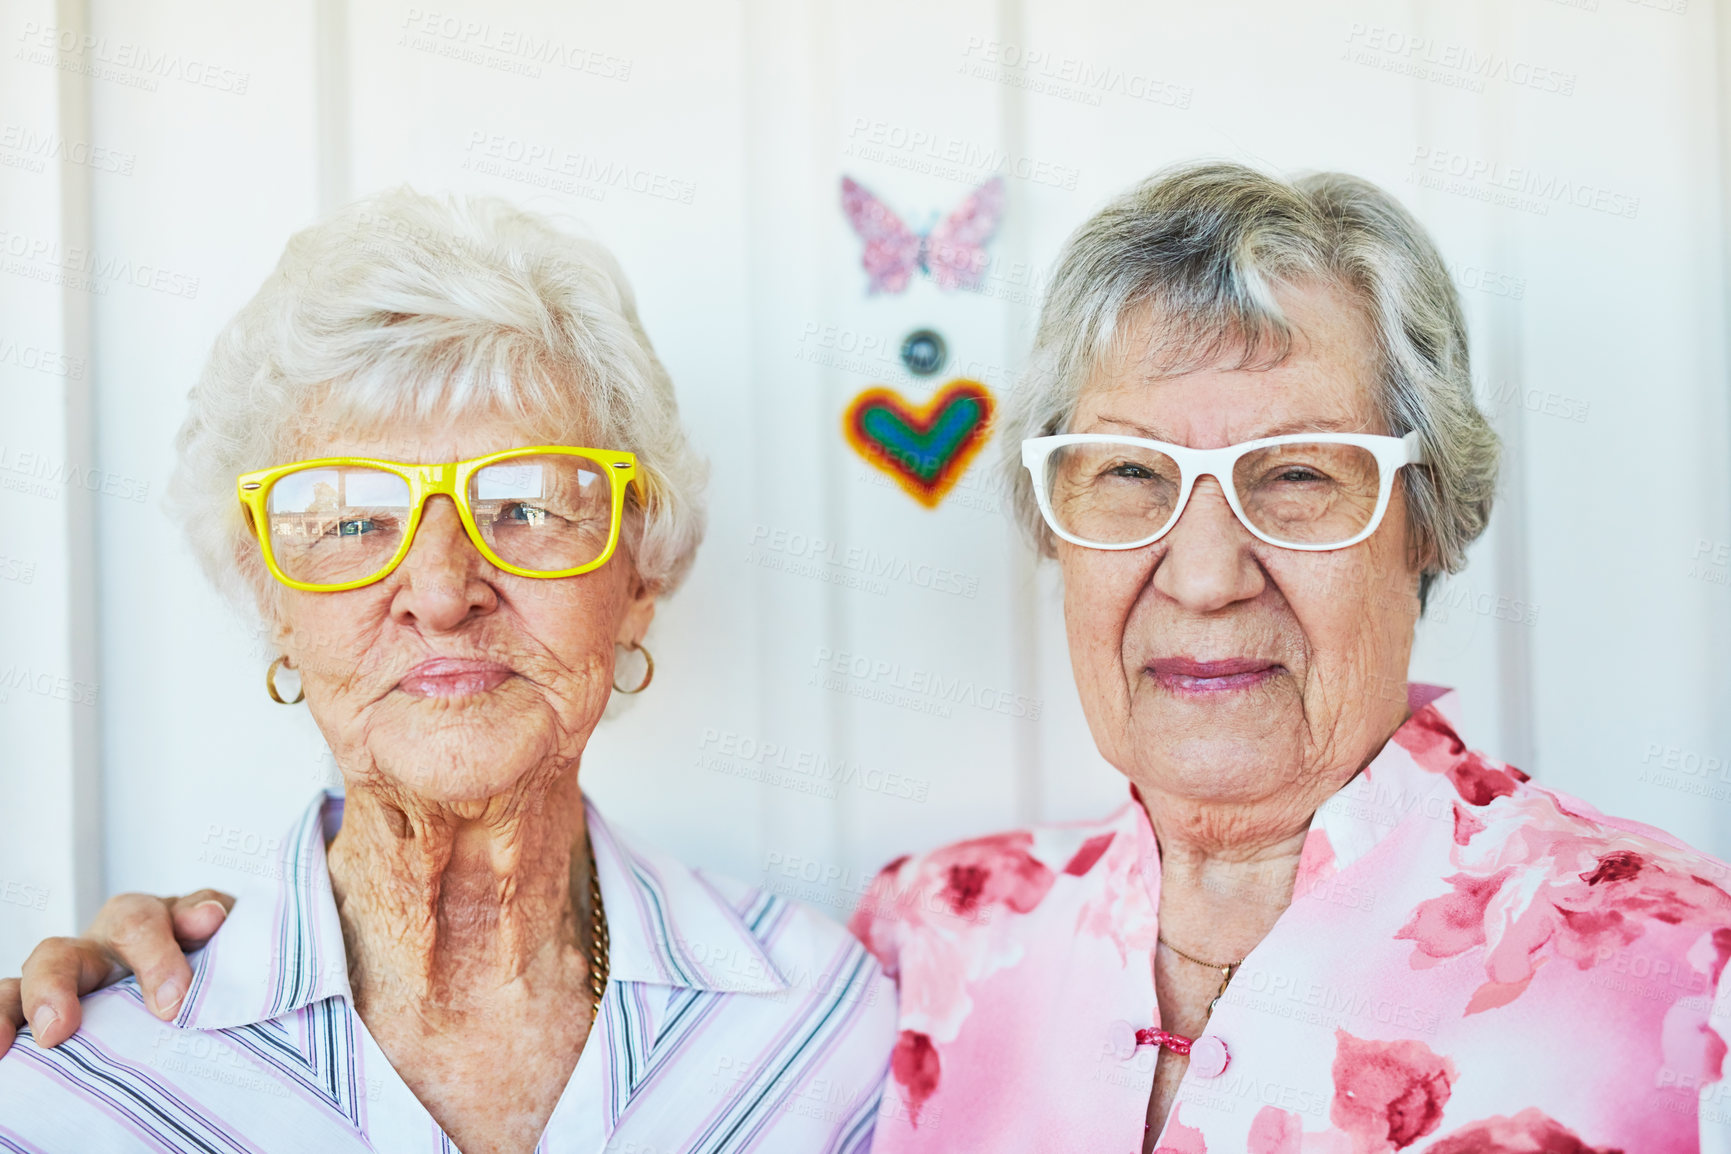 Buy stock photo Portrait of two happy elderly women wearing funky glasses at home